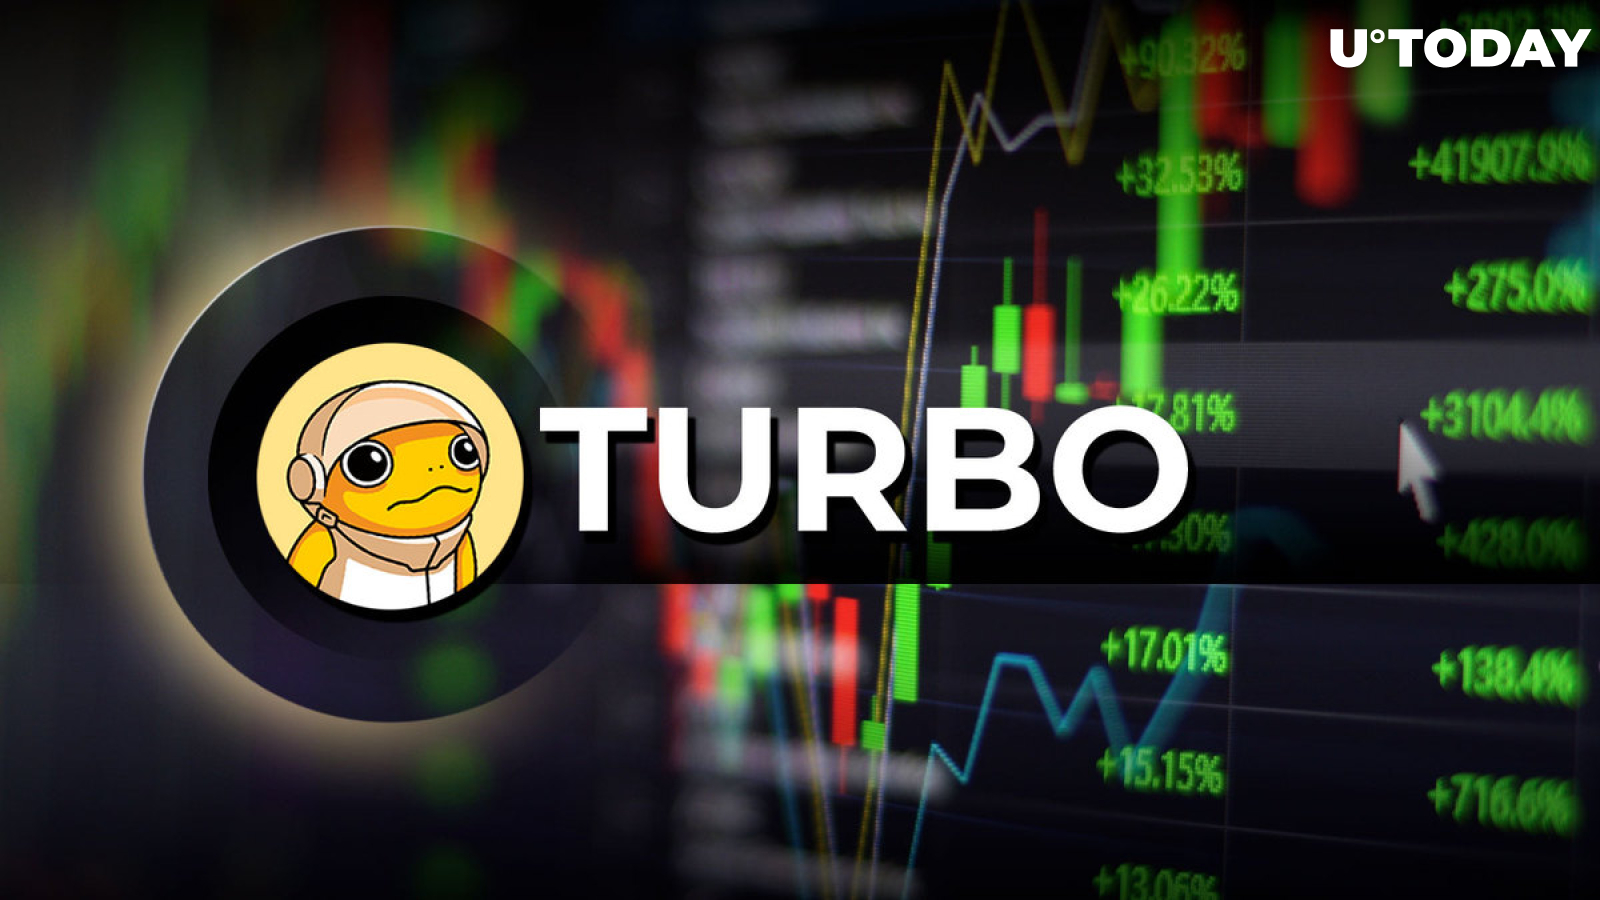 Turbo (TURBO) Meme Coin Price Adds 20% in One Hour: Reason